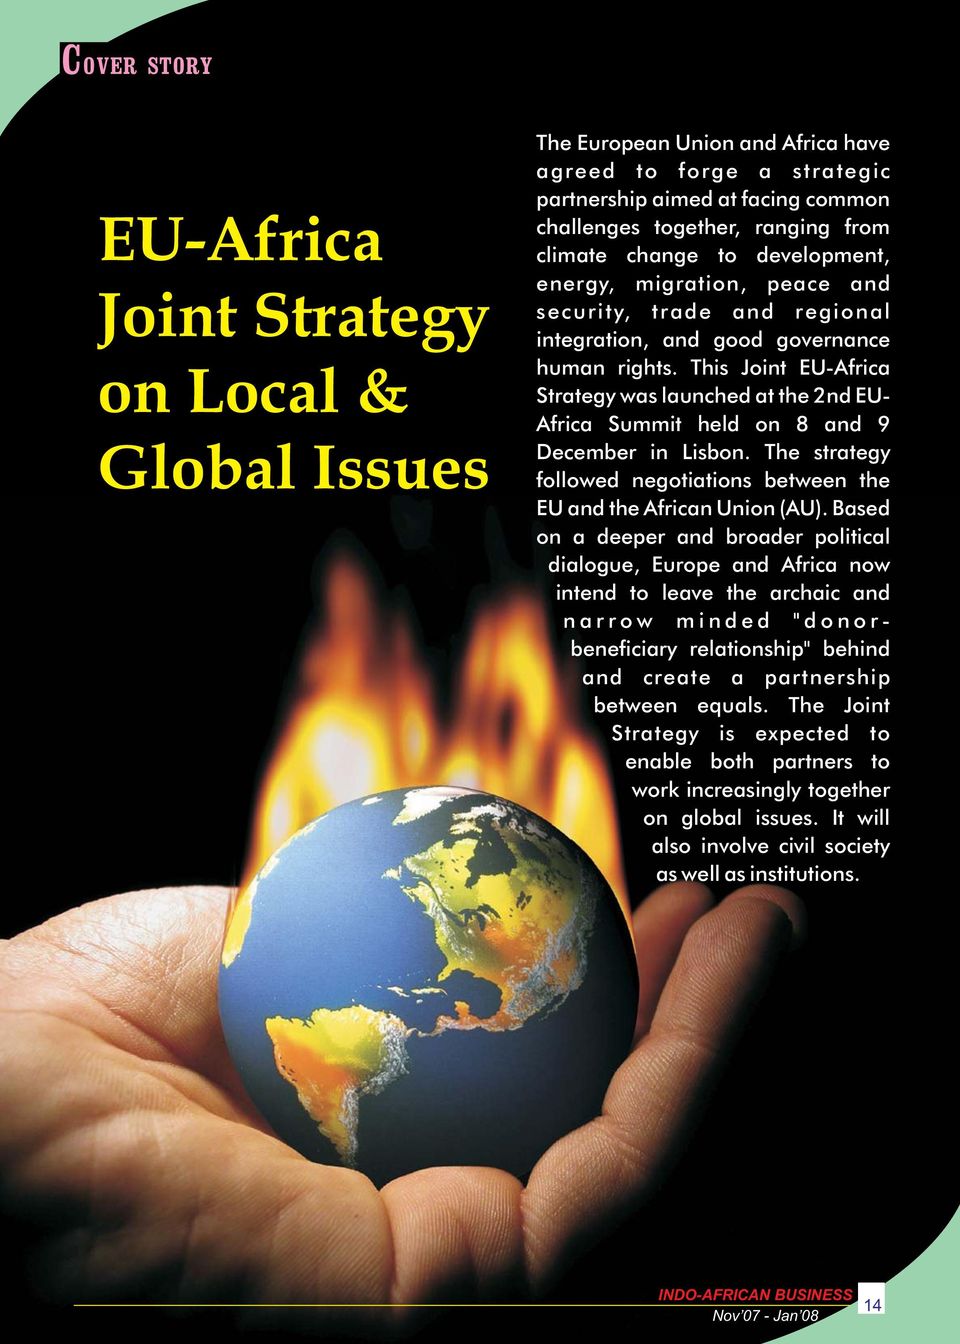 This Joint EU-Africa Strategy was launched at the 2nd EU- Africa Summit held on 8 and 9 December in Lisbon. The strategy followed negotiations between the EU and the African Union (AU).